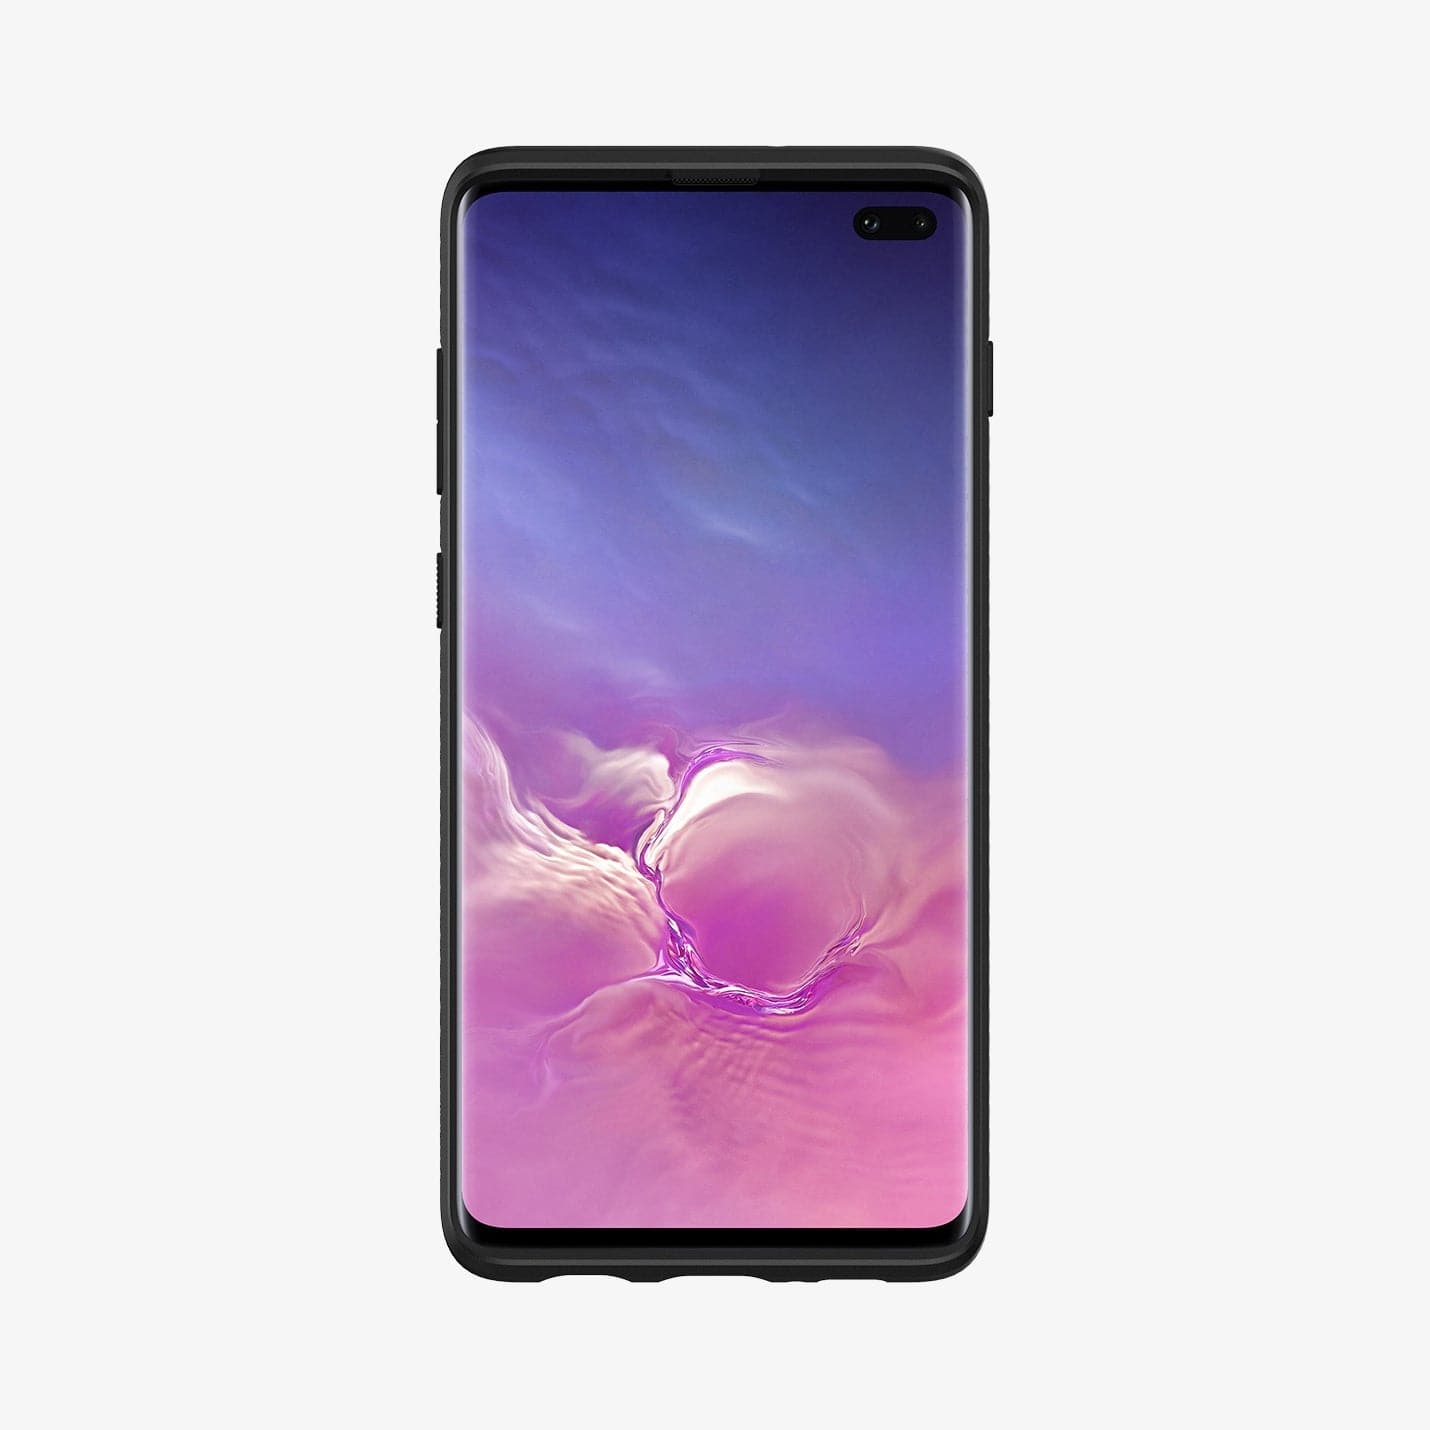 606CS25764 - Galaxy S10 Plus Liquid Air Case in black showing the front